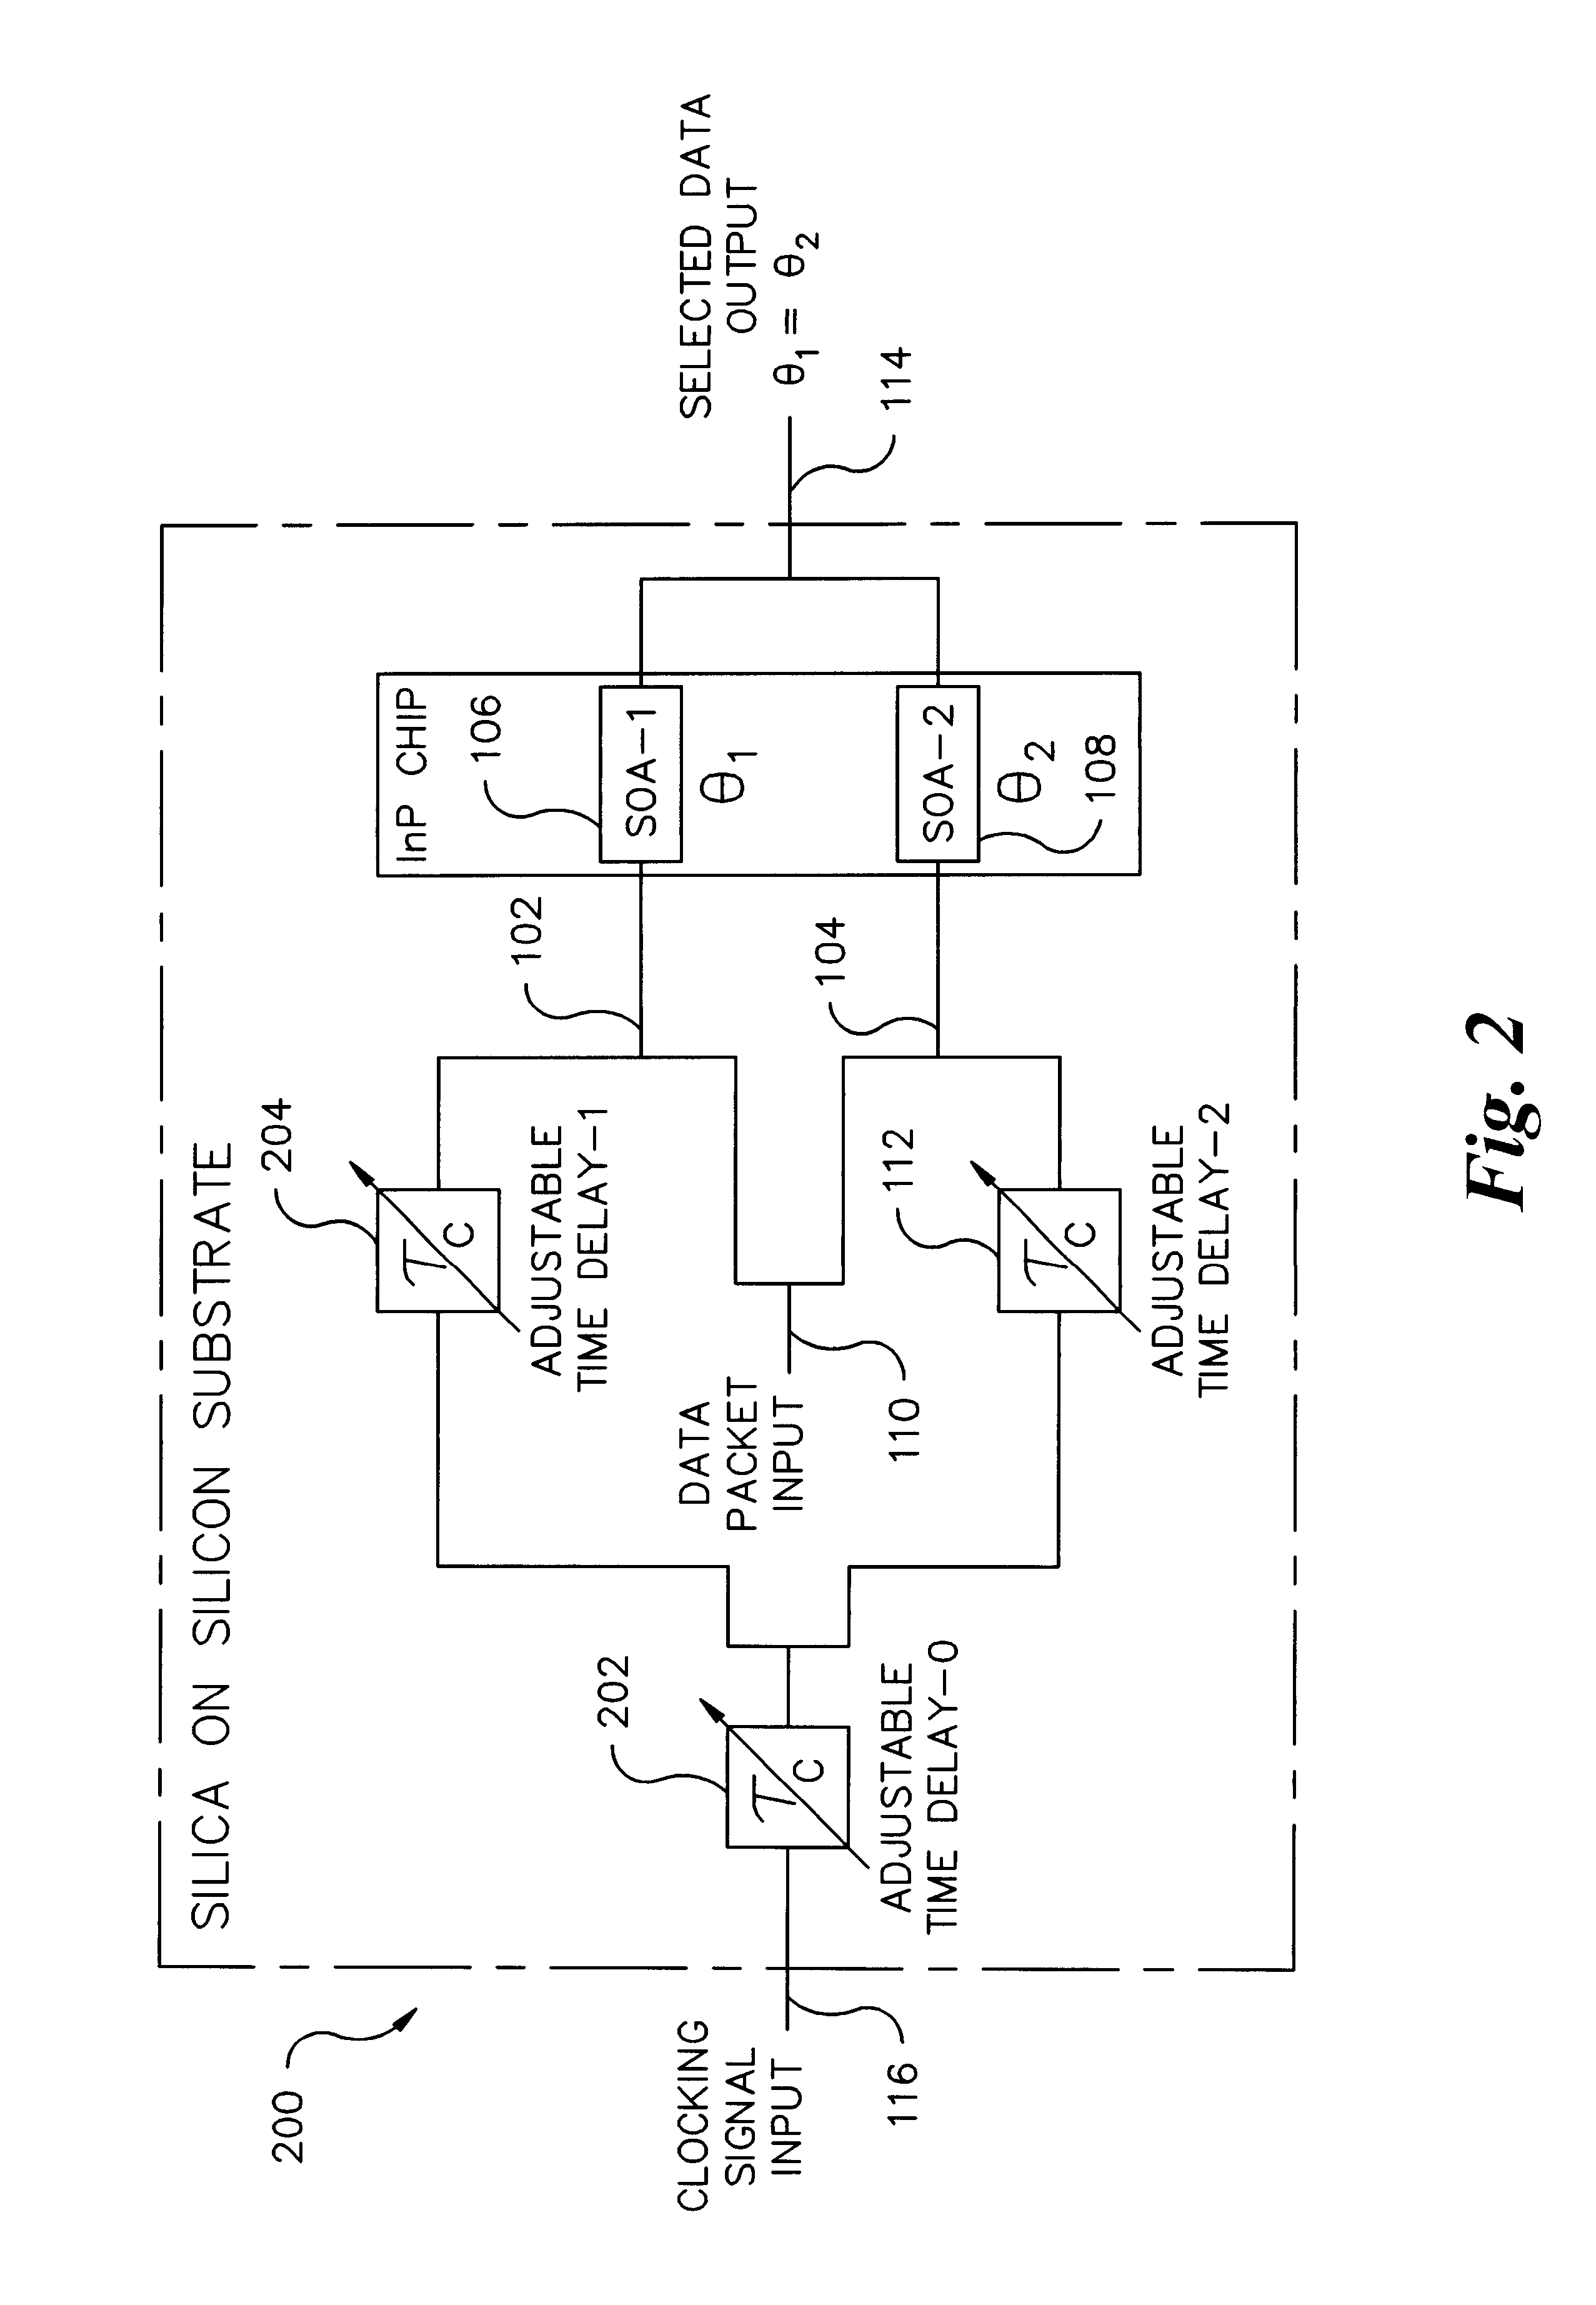 Time slot tunable all-optical packet data demultiplexer